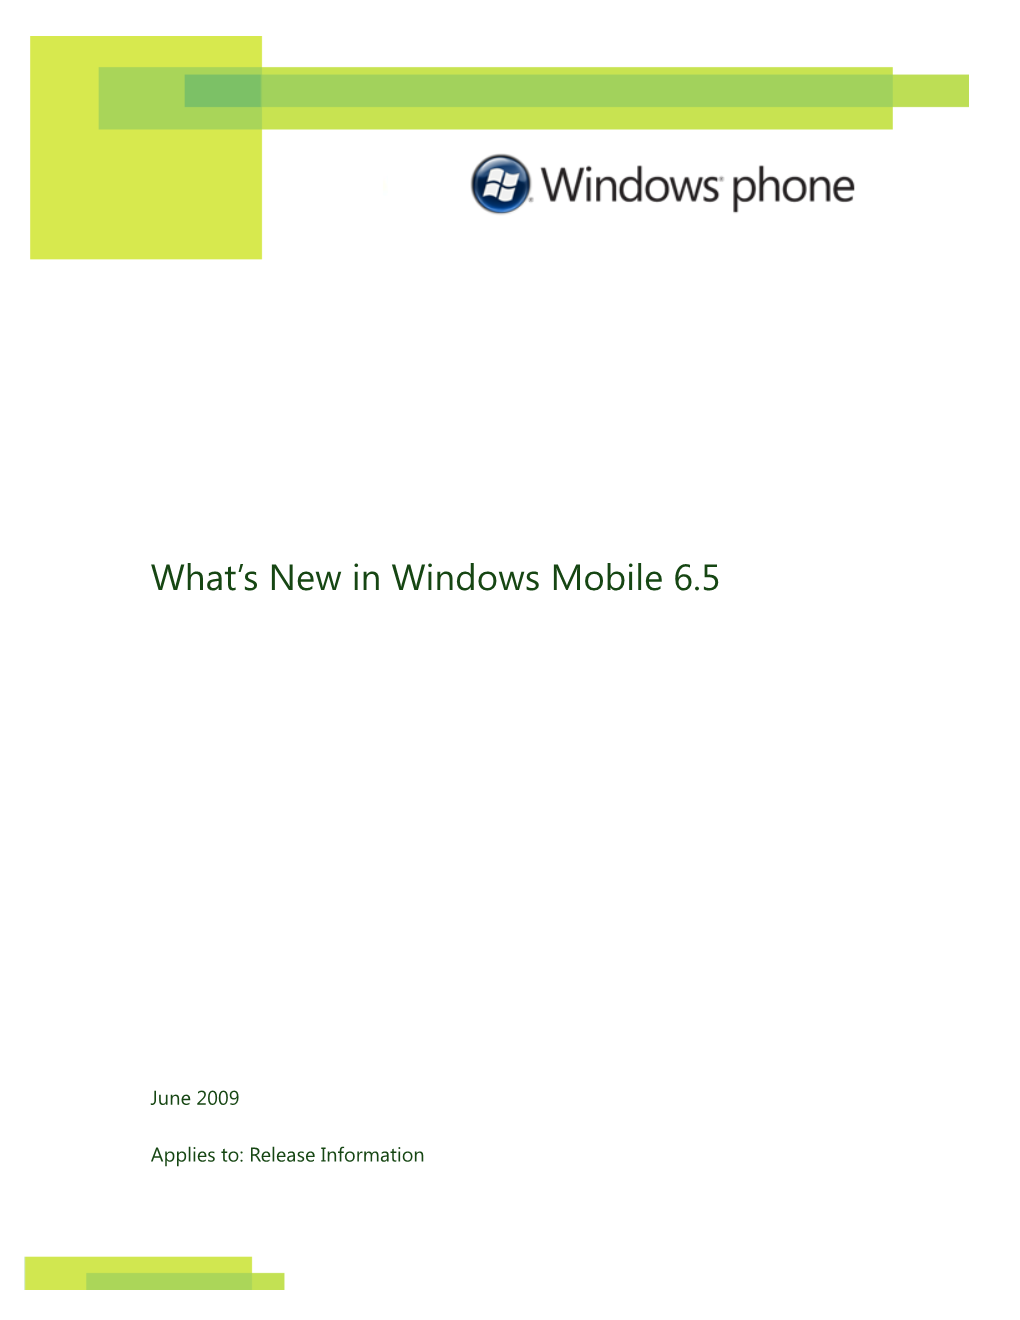 What's New in Windows Mobile